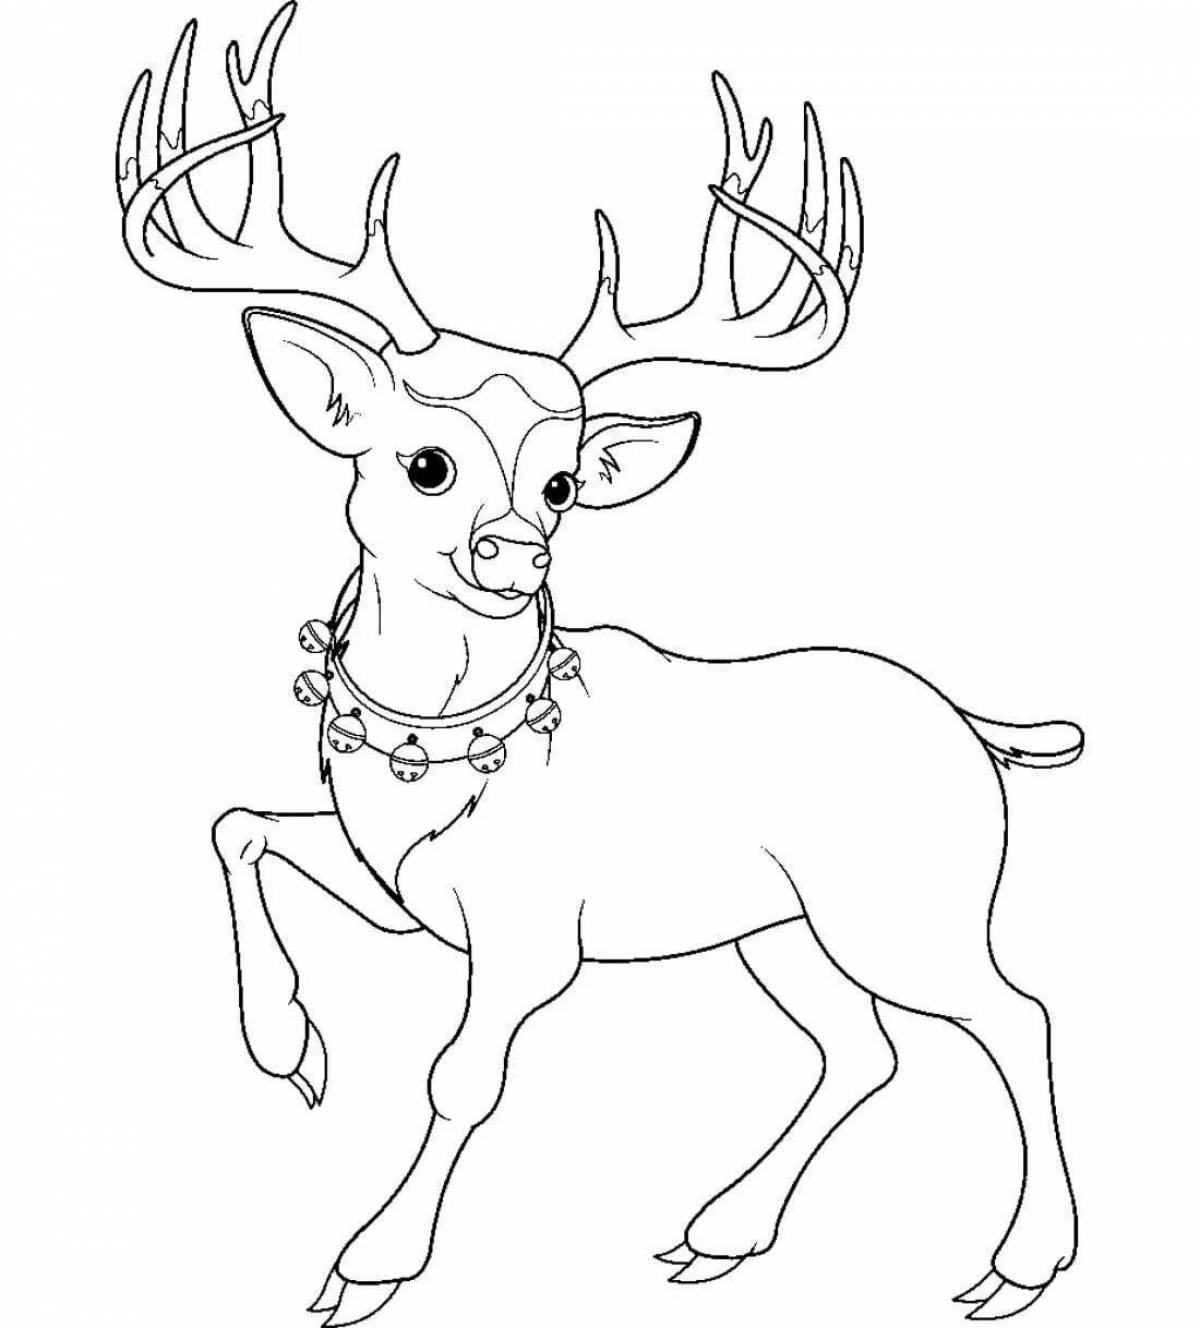 Silver hoof coloring book for children